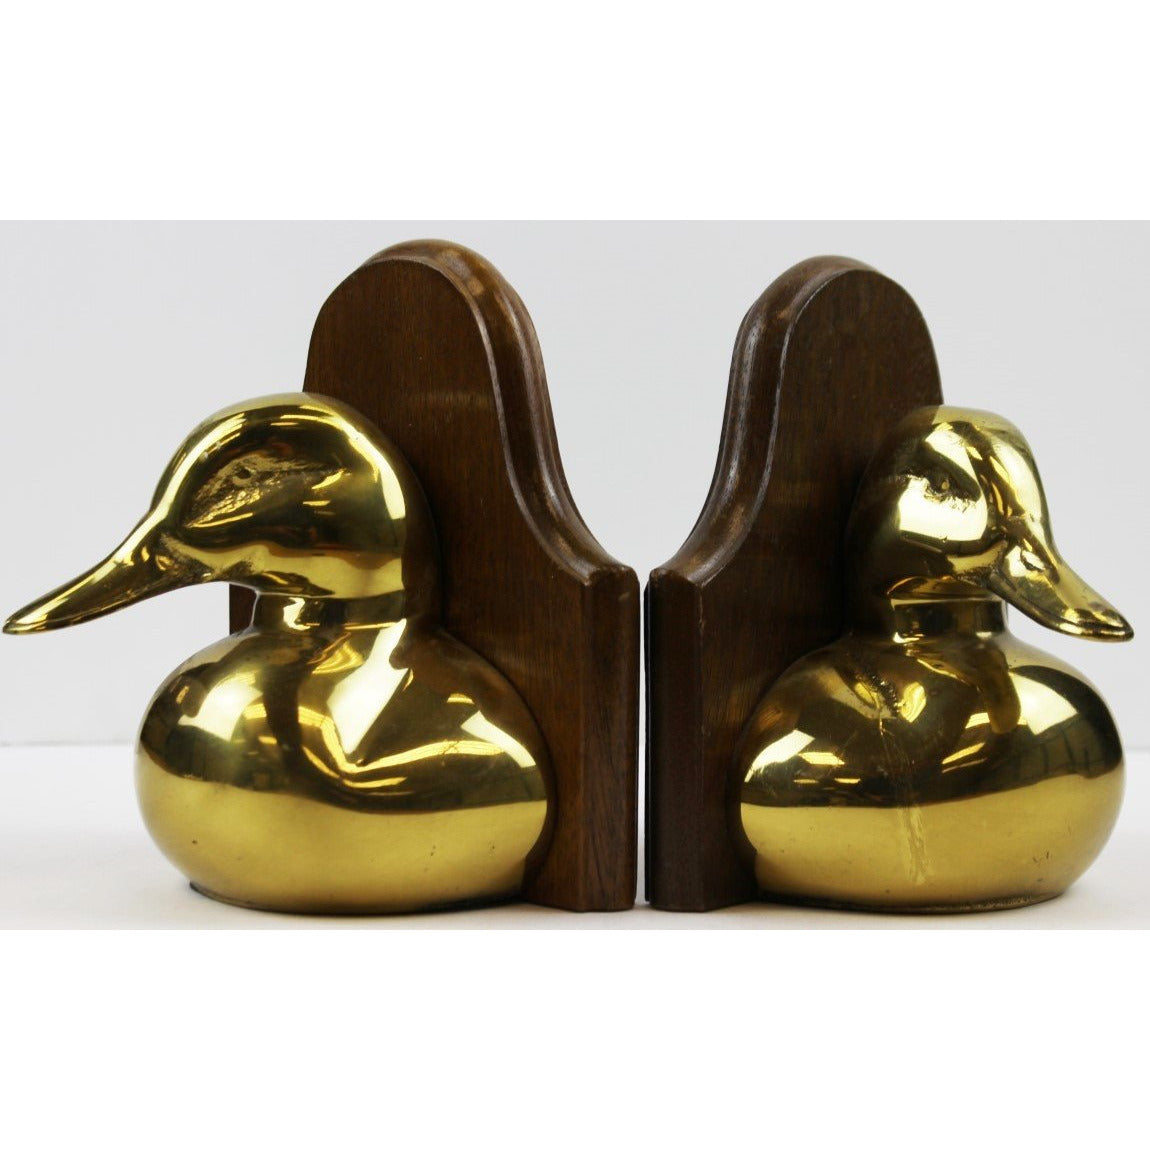 Pair of Brass Mallard Duck Head Bookends Sold by Brooks Brothers